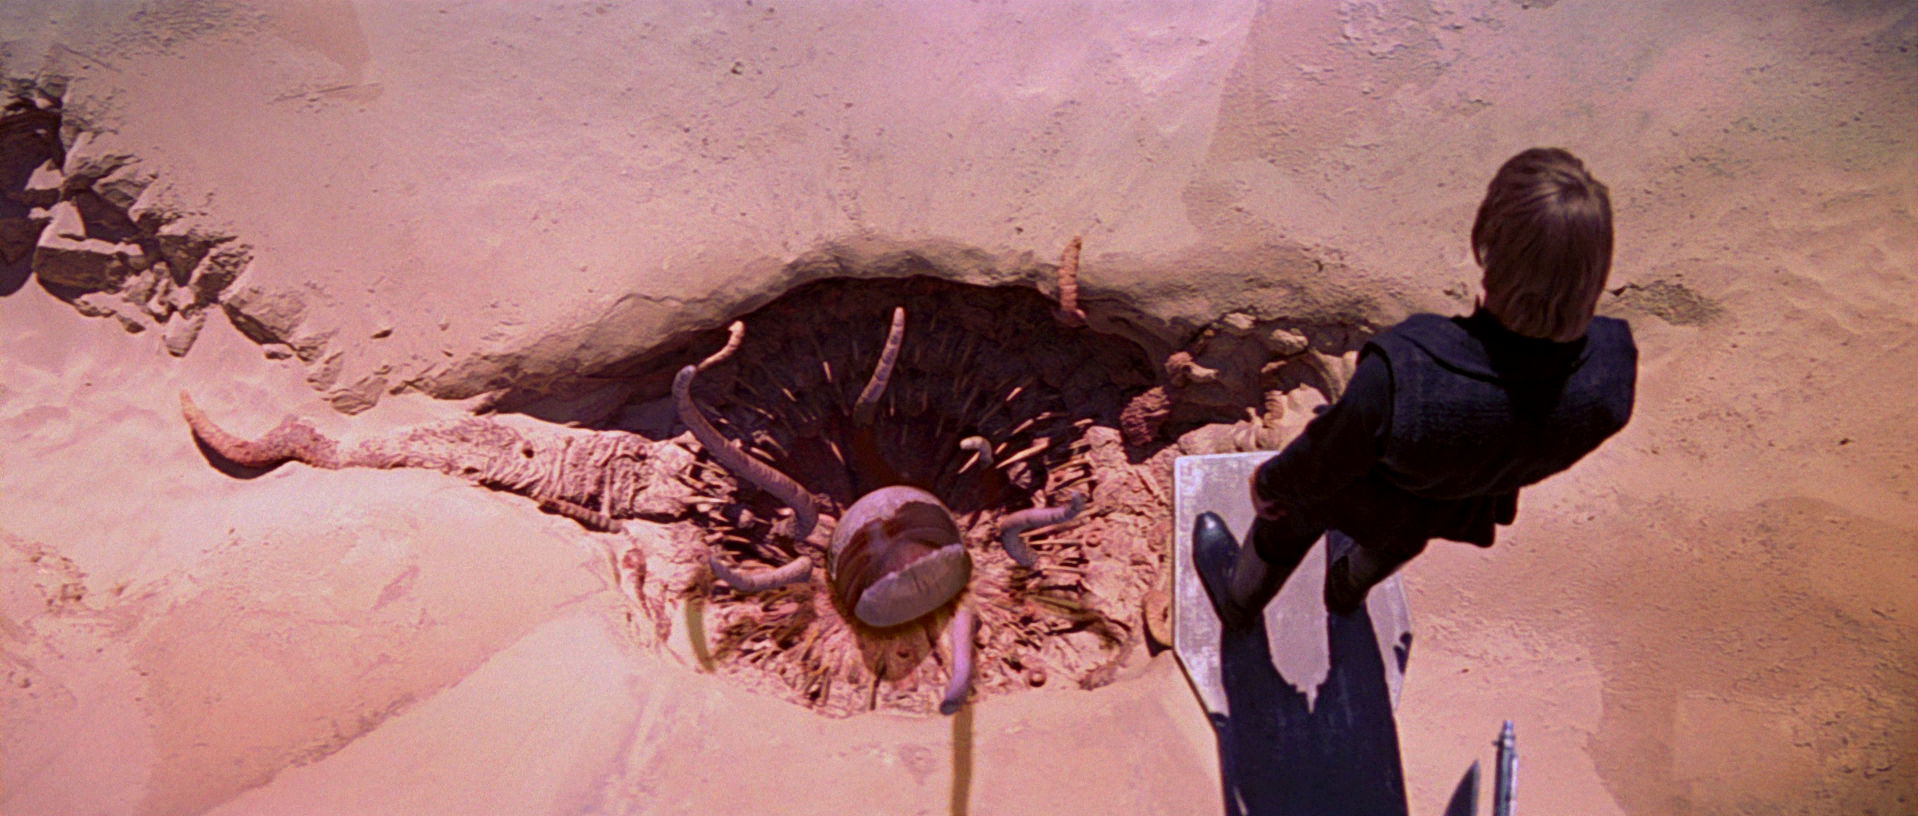 How long does it take to be digested in the Sarlacc pit?